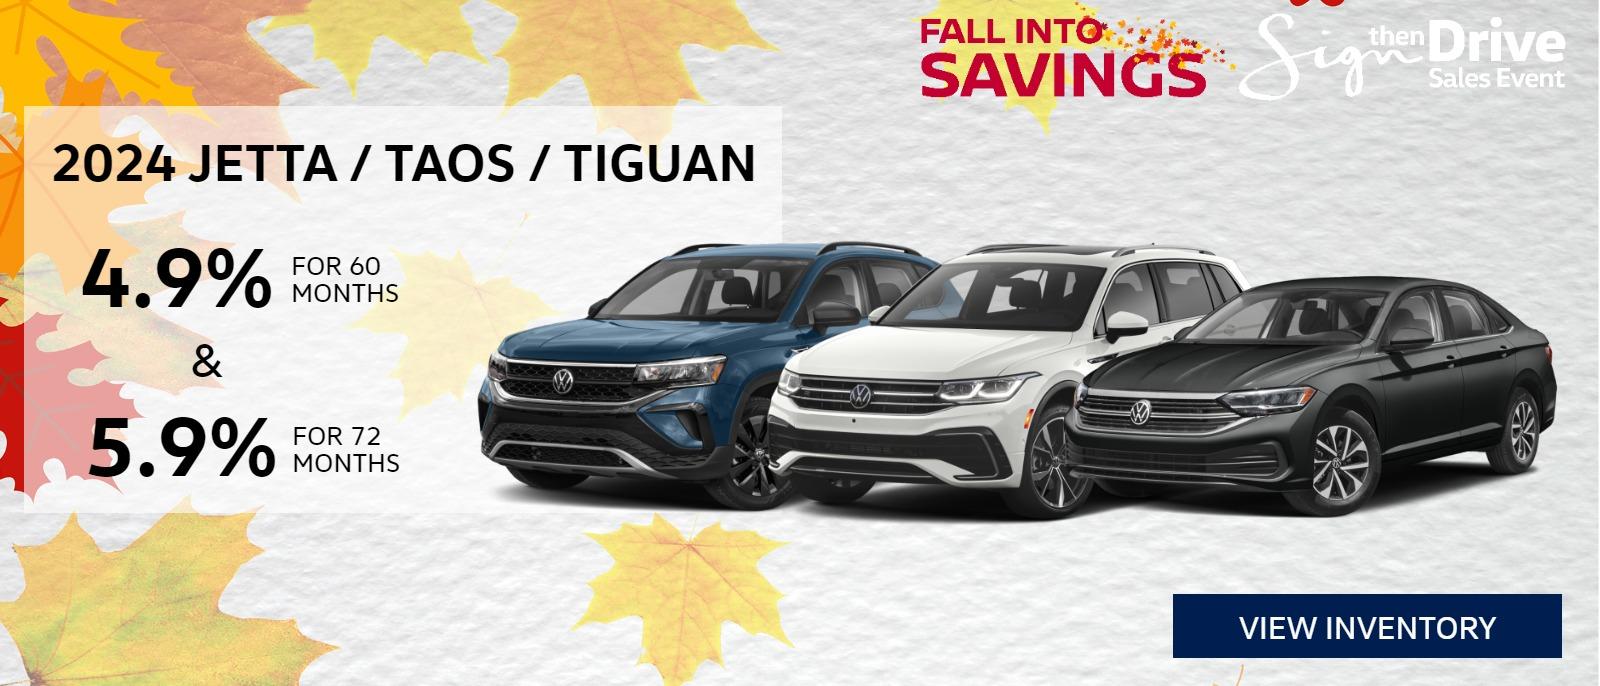 2024 Jetta/Taos/Tiguan – 4.9% for 60 mos. and 5.9% for 72 mos.